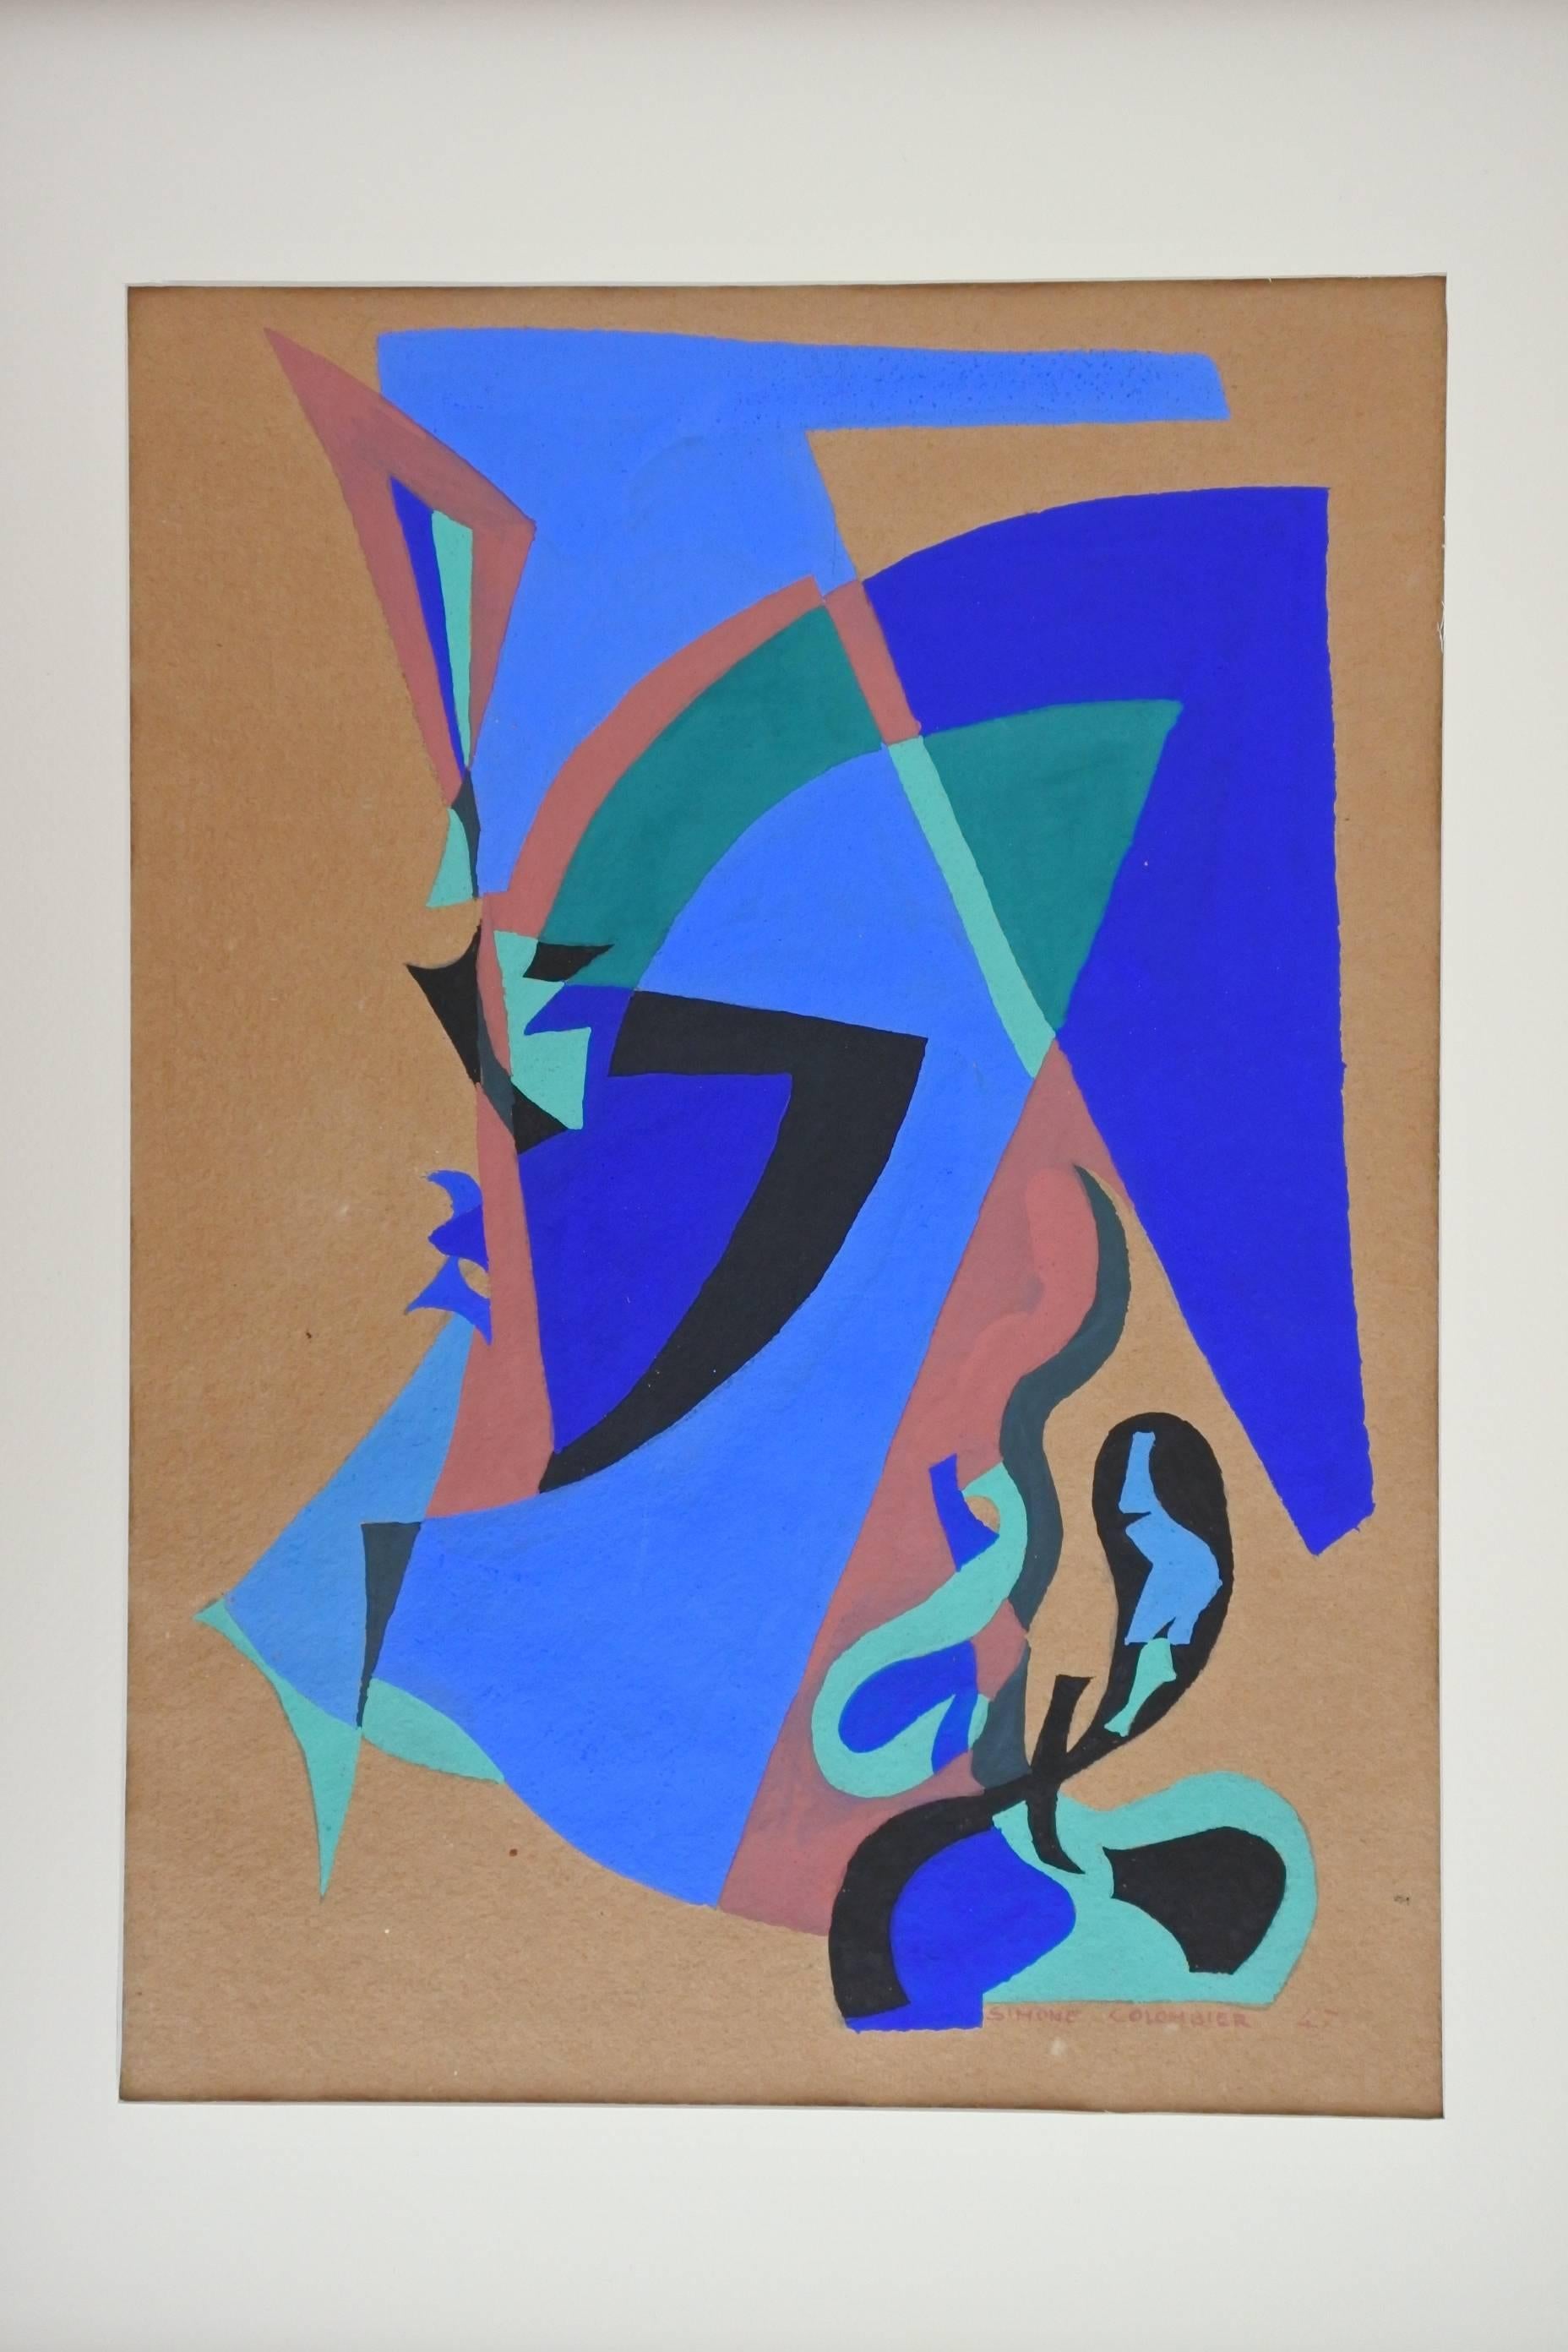 Framed abstract gouache on paper by French painter Simone Colombier.
Signed and dated 1947.
Simone Colombier took part of the abstract movement in Bordeaux, France in the mid-1940s. She exhibited her painted at various Art show (Salon des Réalités